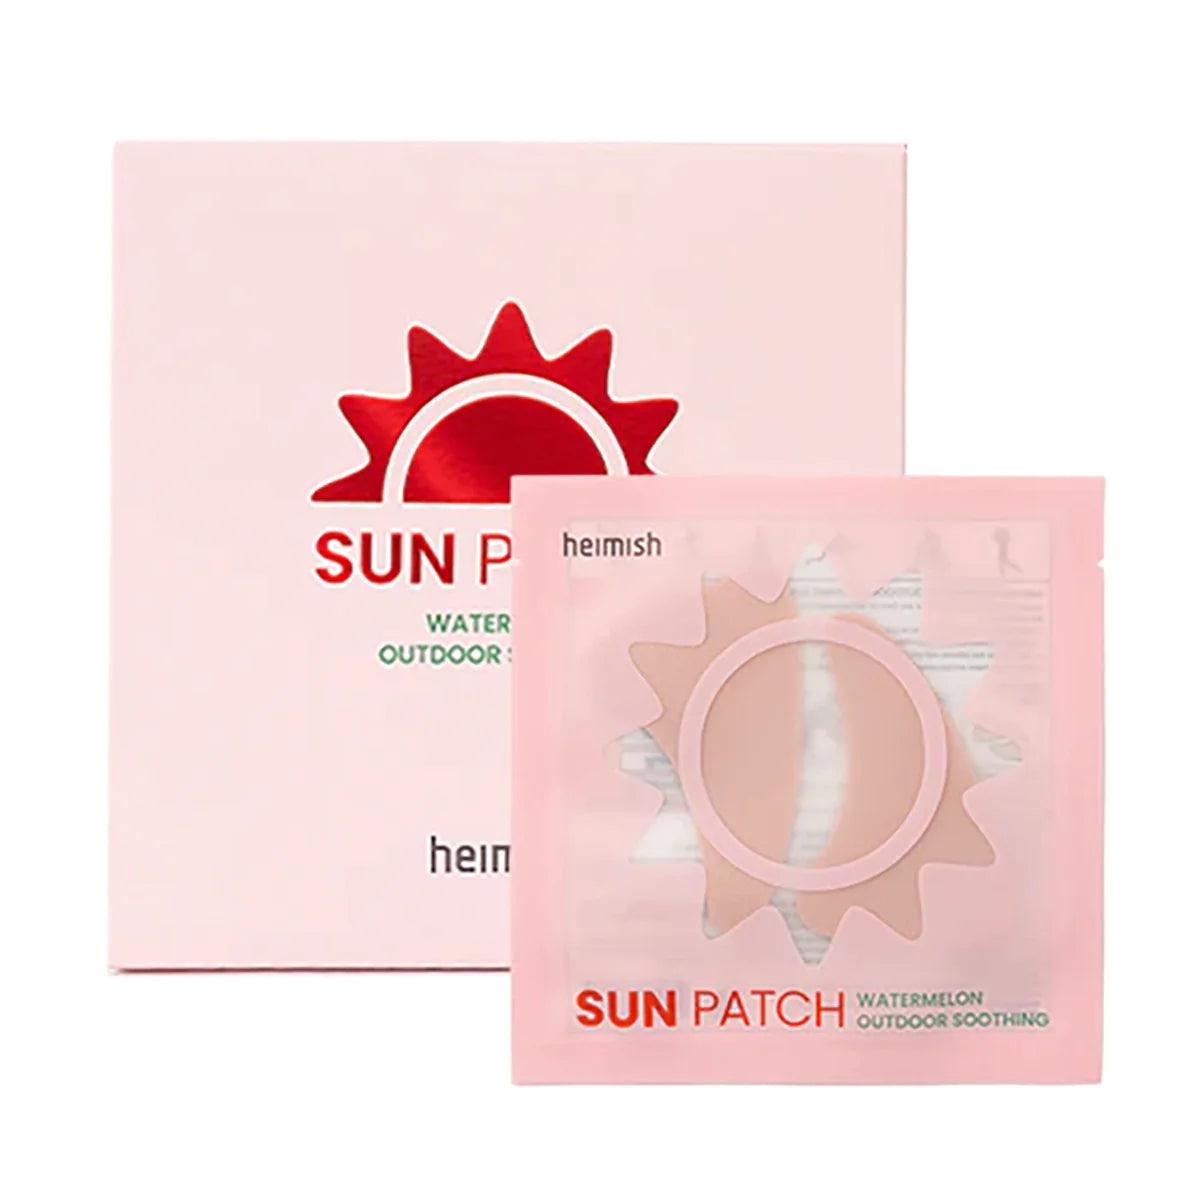 Watermelon Outdoor Soothing Sun Patch - 5 pairs - K-Beauty Arabia